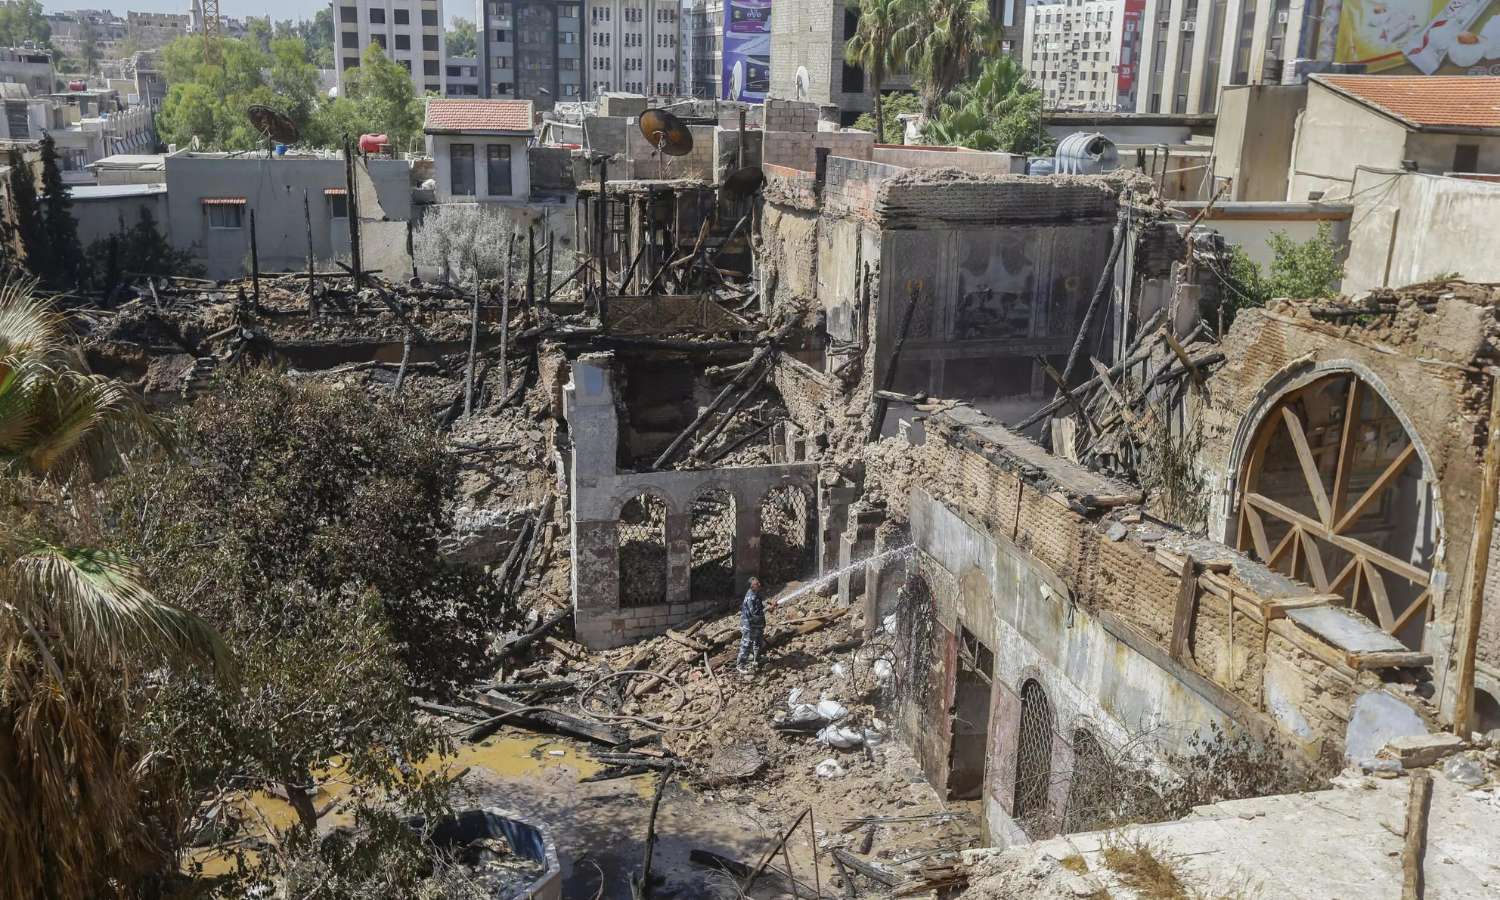 The collapsed home of Emir Abd al-Rahman Pasha al-Youssef, who led Syrian pilgrims on the Hajj pilgrimage in the late 19th and early 20th centuries and was a member of the Ottoman Senate - July 18, 2023 (AFP)